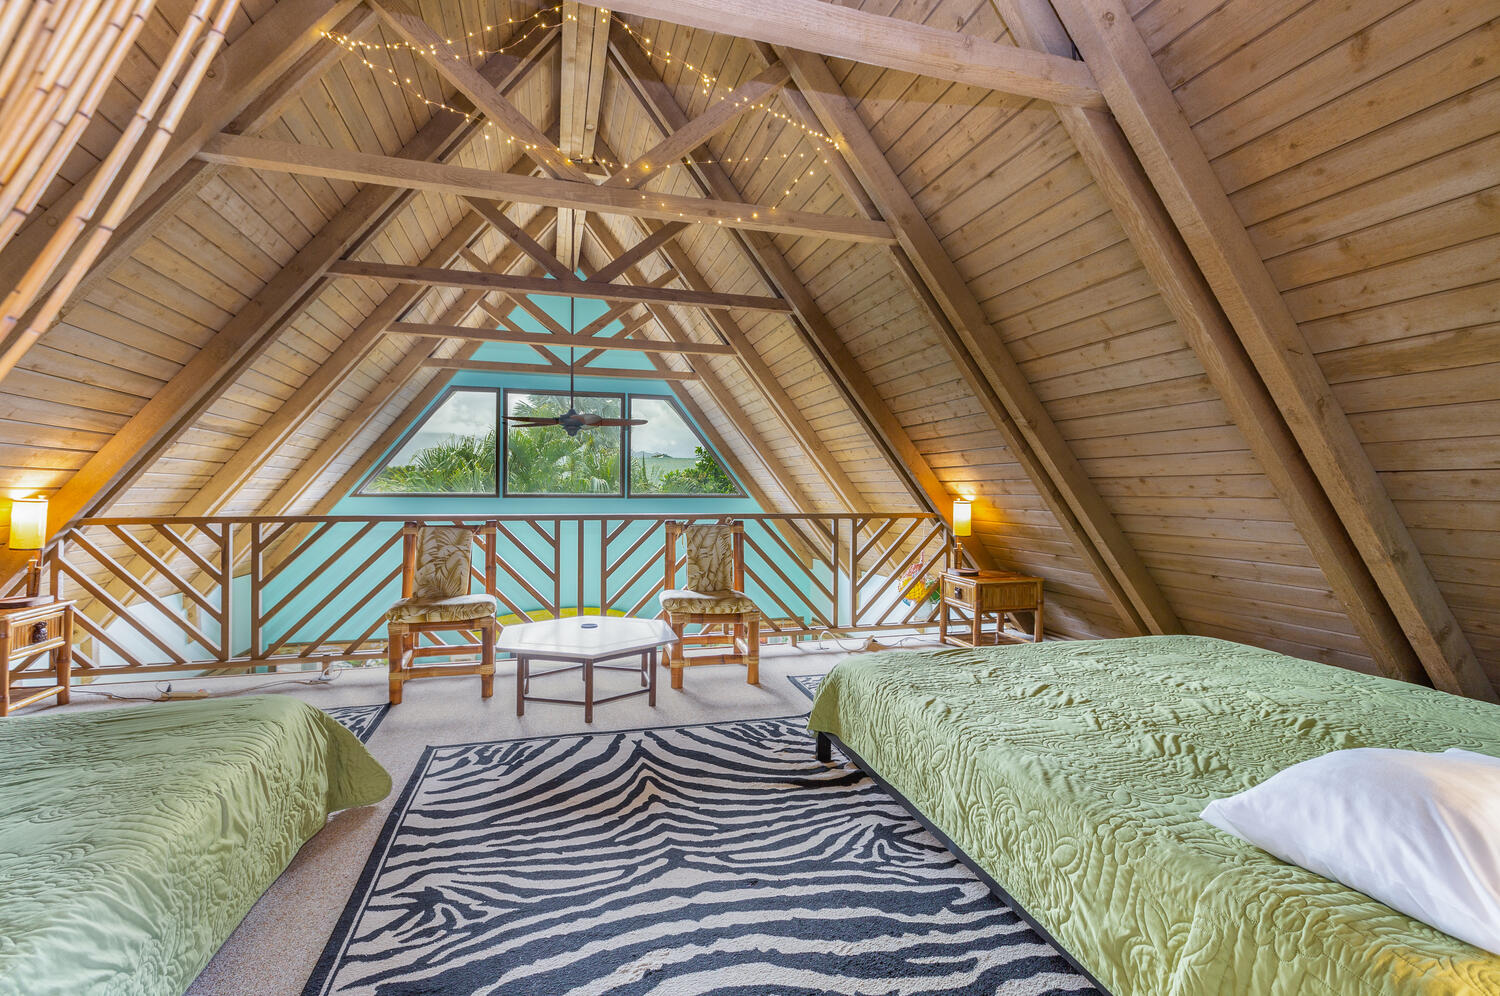 Two king size beds in the loft area